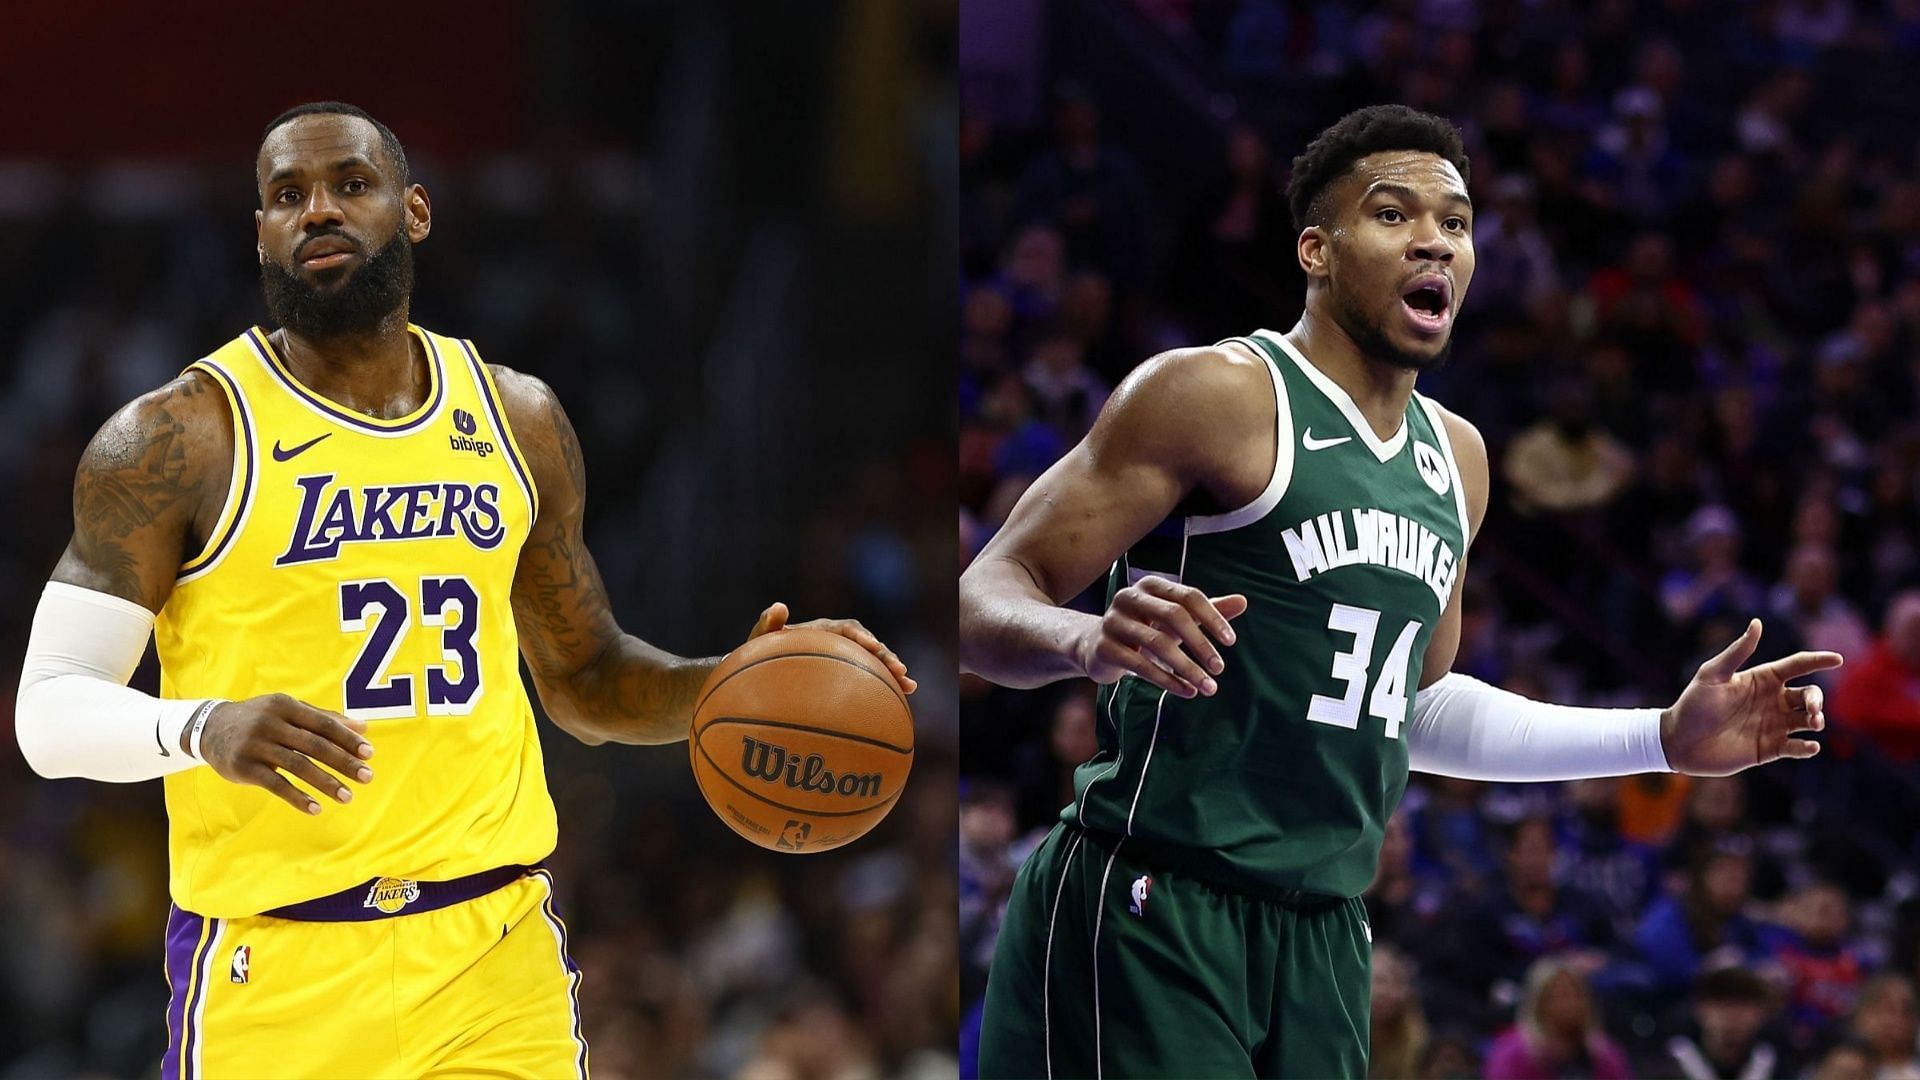 How to watch LA Lakers Vs Milwaukee Bucks NBA basketball game tonight? TV channel, streaming options &amp; more explored